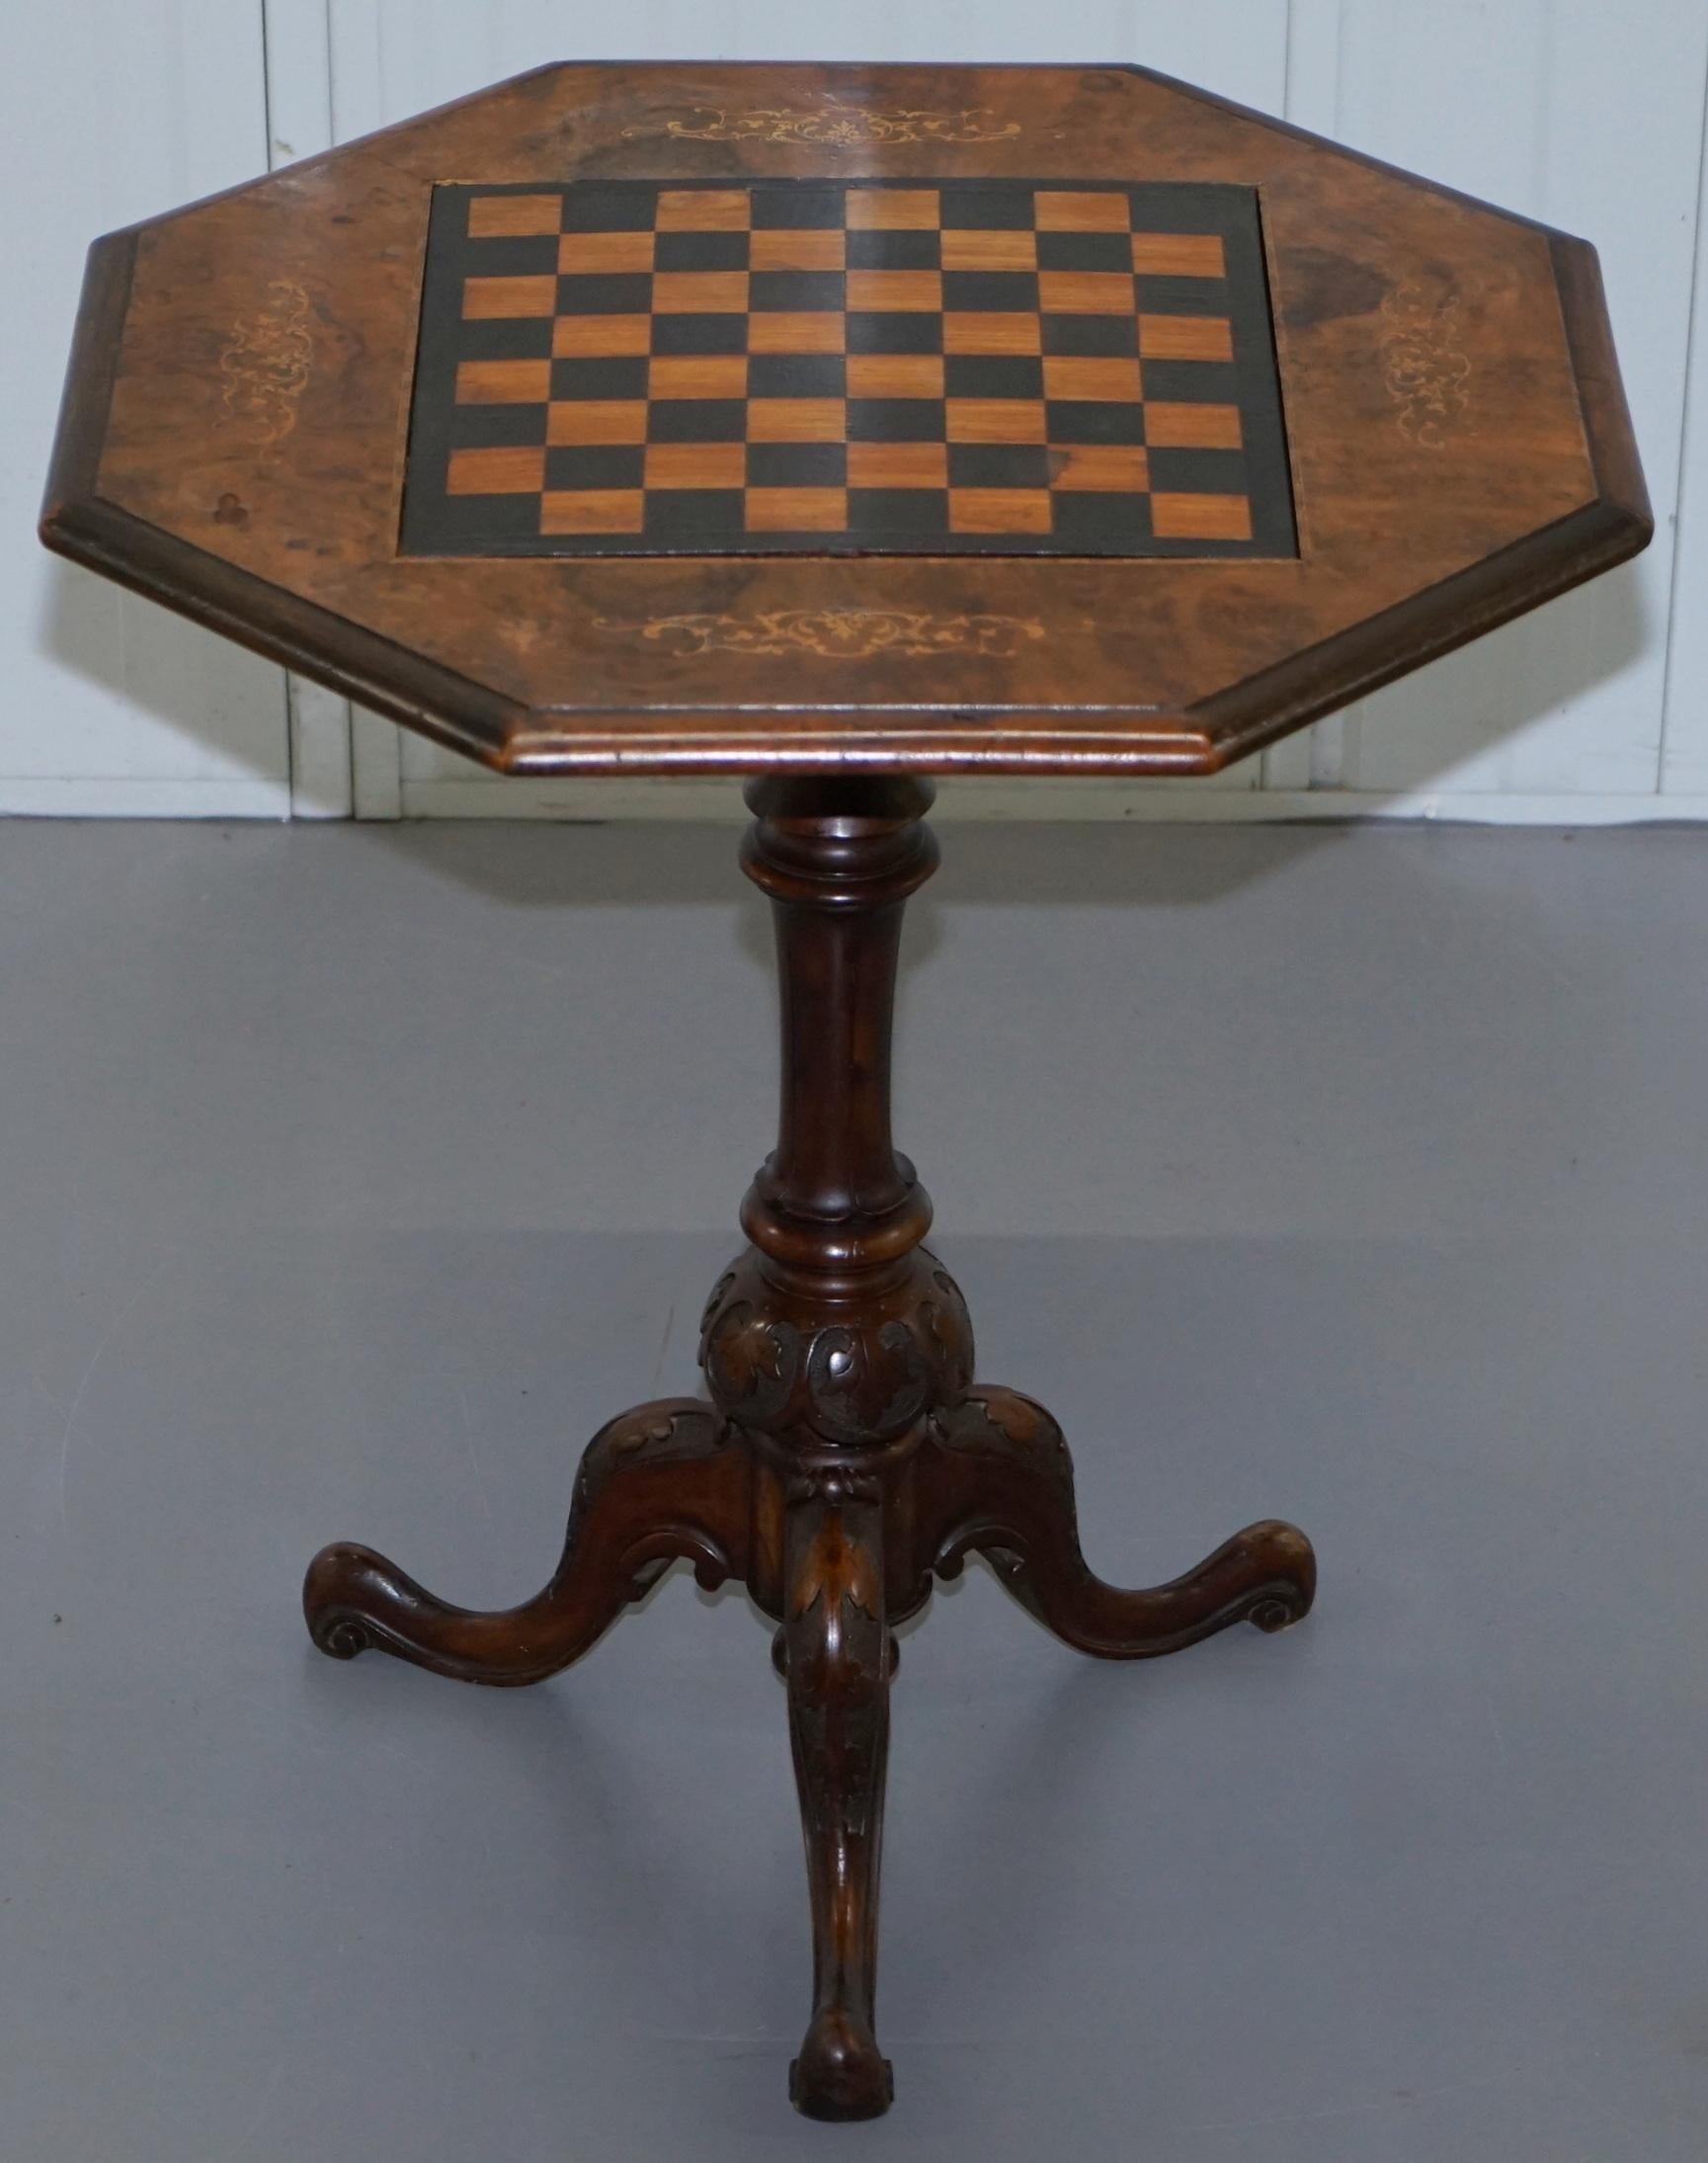 We are delighted to this lovely Victorian 1880 walnut marquetry inlaid reversible chess to backgammon and cribbage board games table

A very good looking well-made and function piece of furniture, extremely decorative, the top has gorgeous walnut